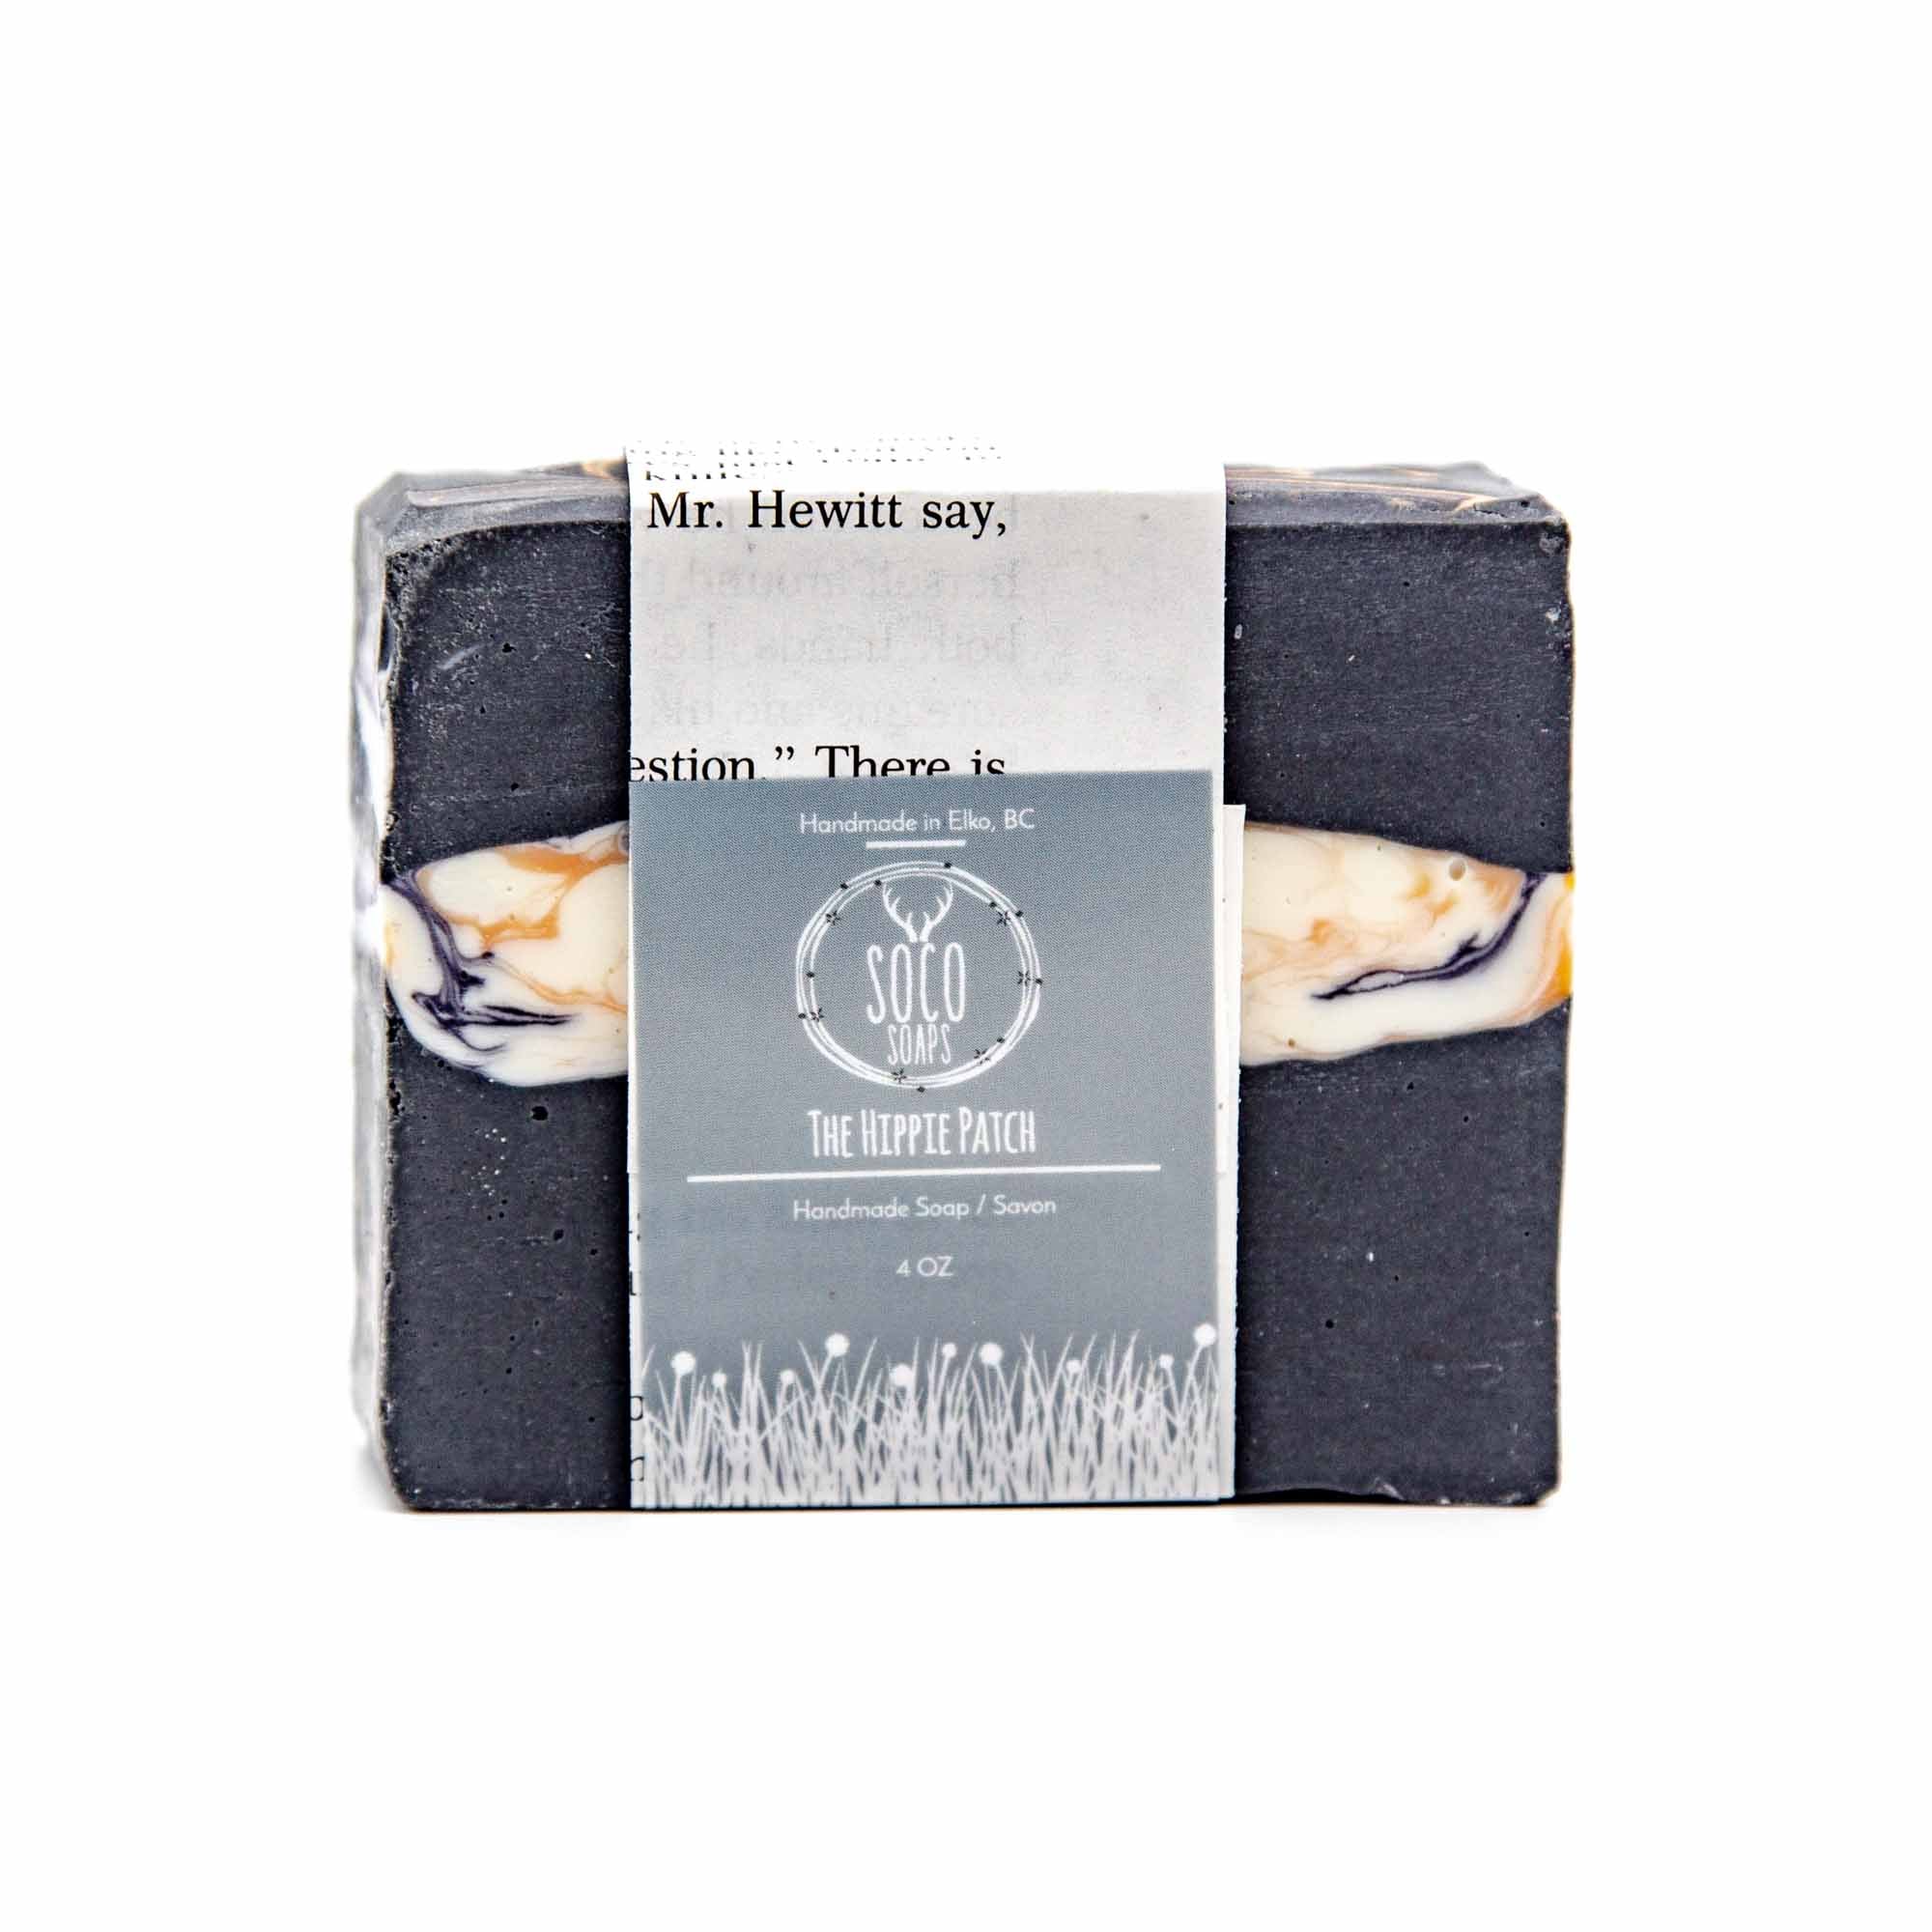 Soco Soaps The Hippie Patch Bar Soap - Mortise And Tenon